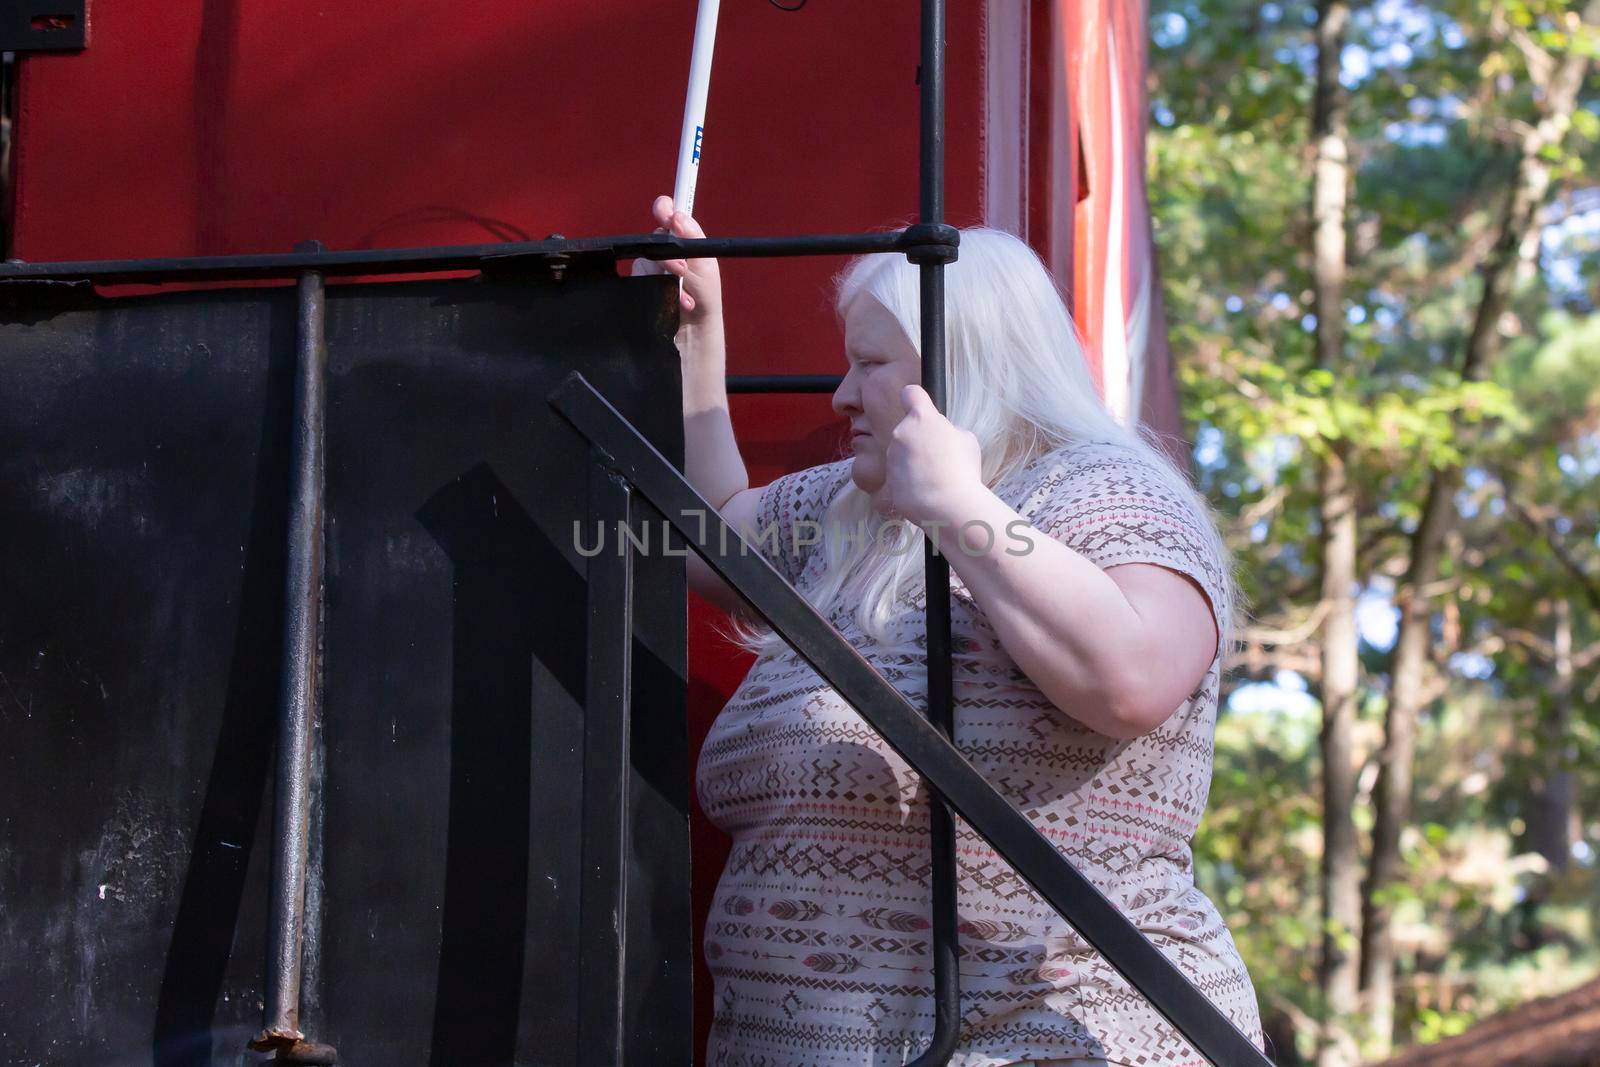 Albino woman climbing up into the caboose of a train